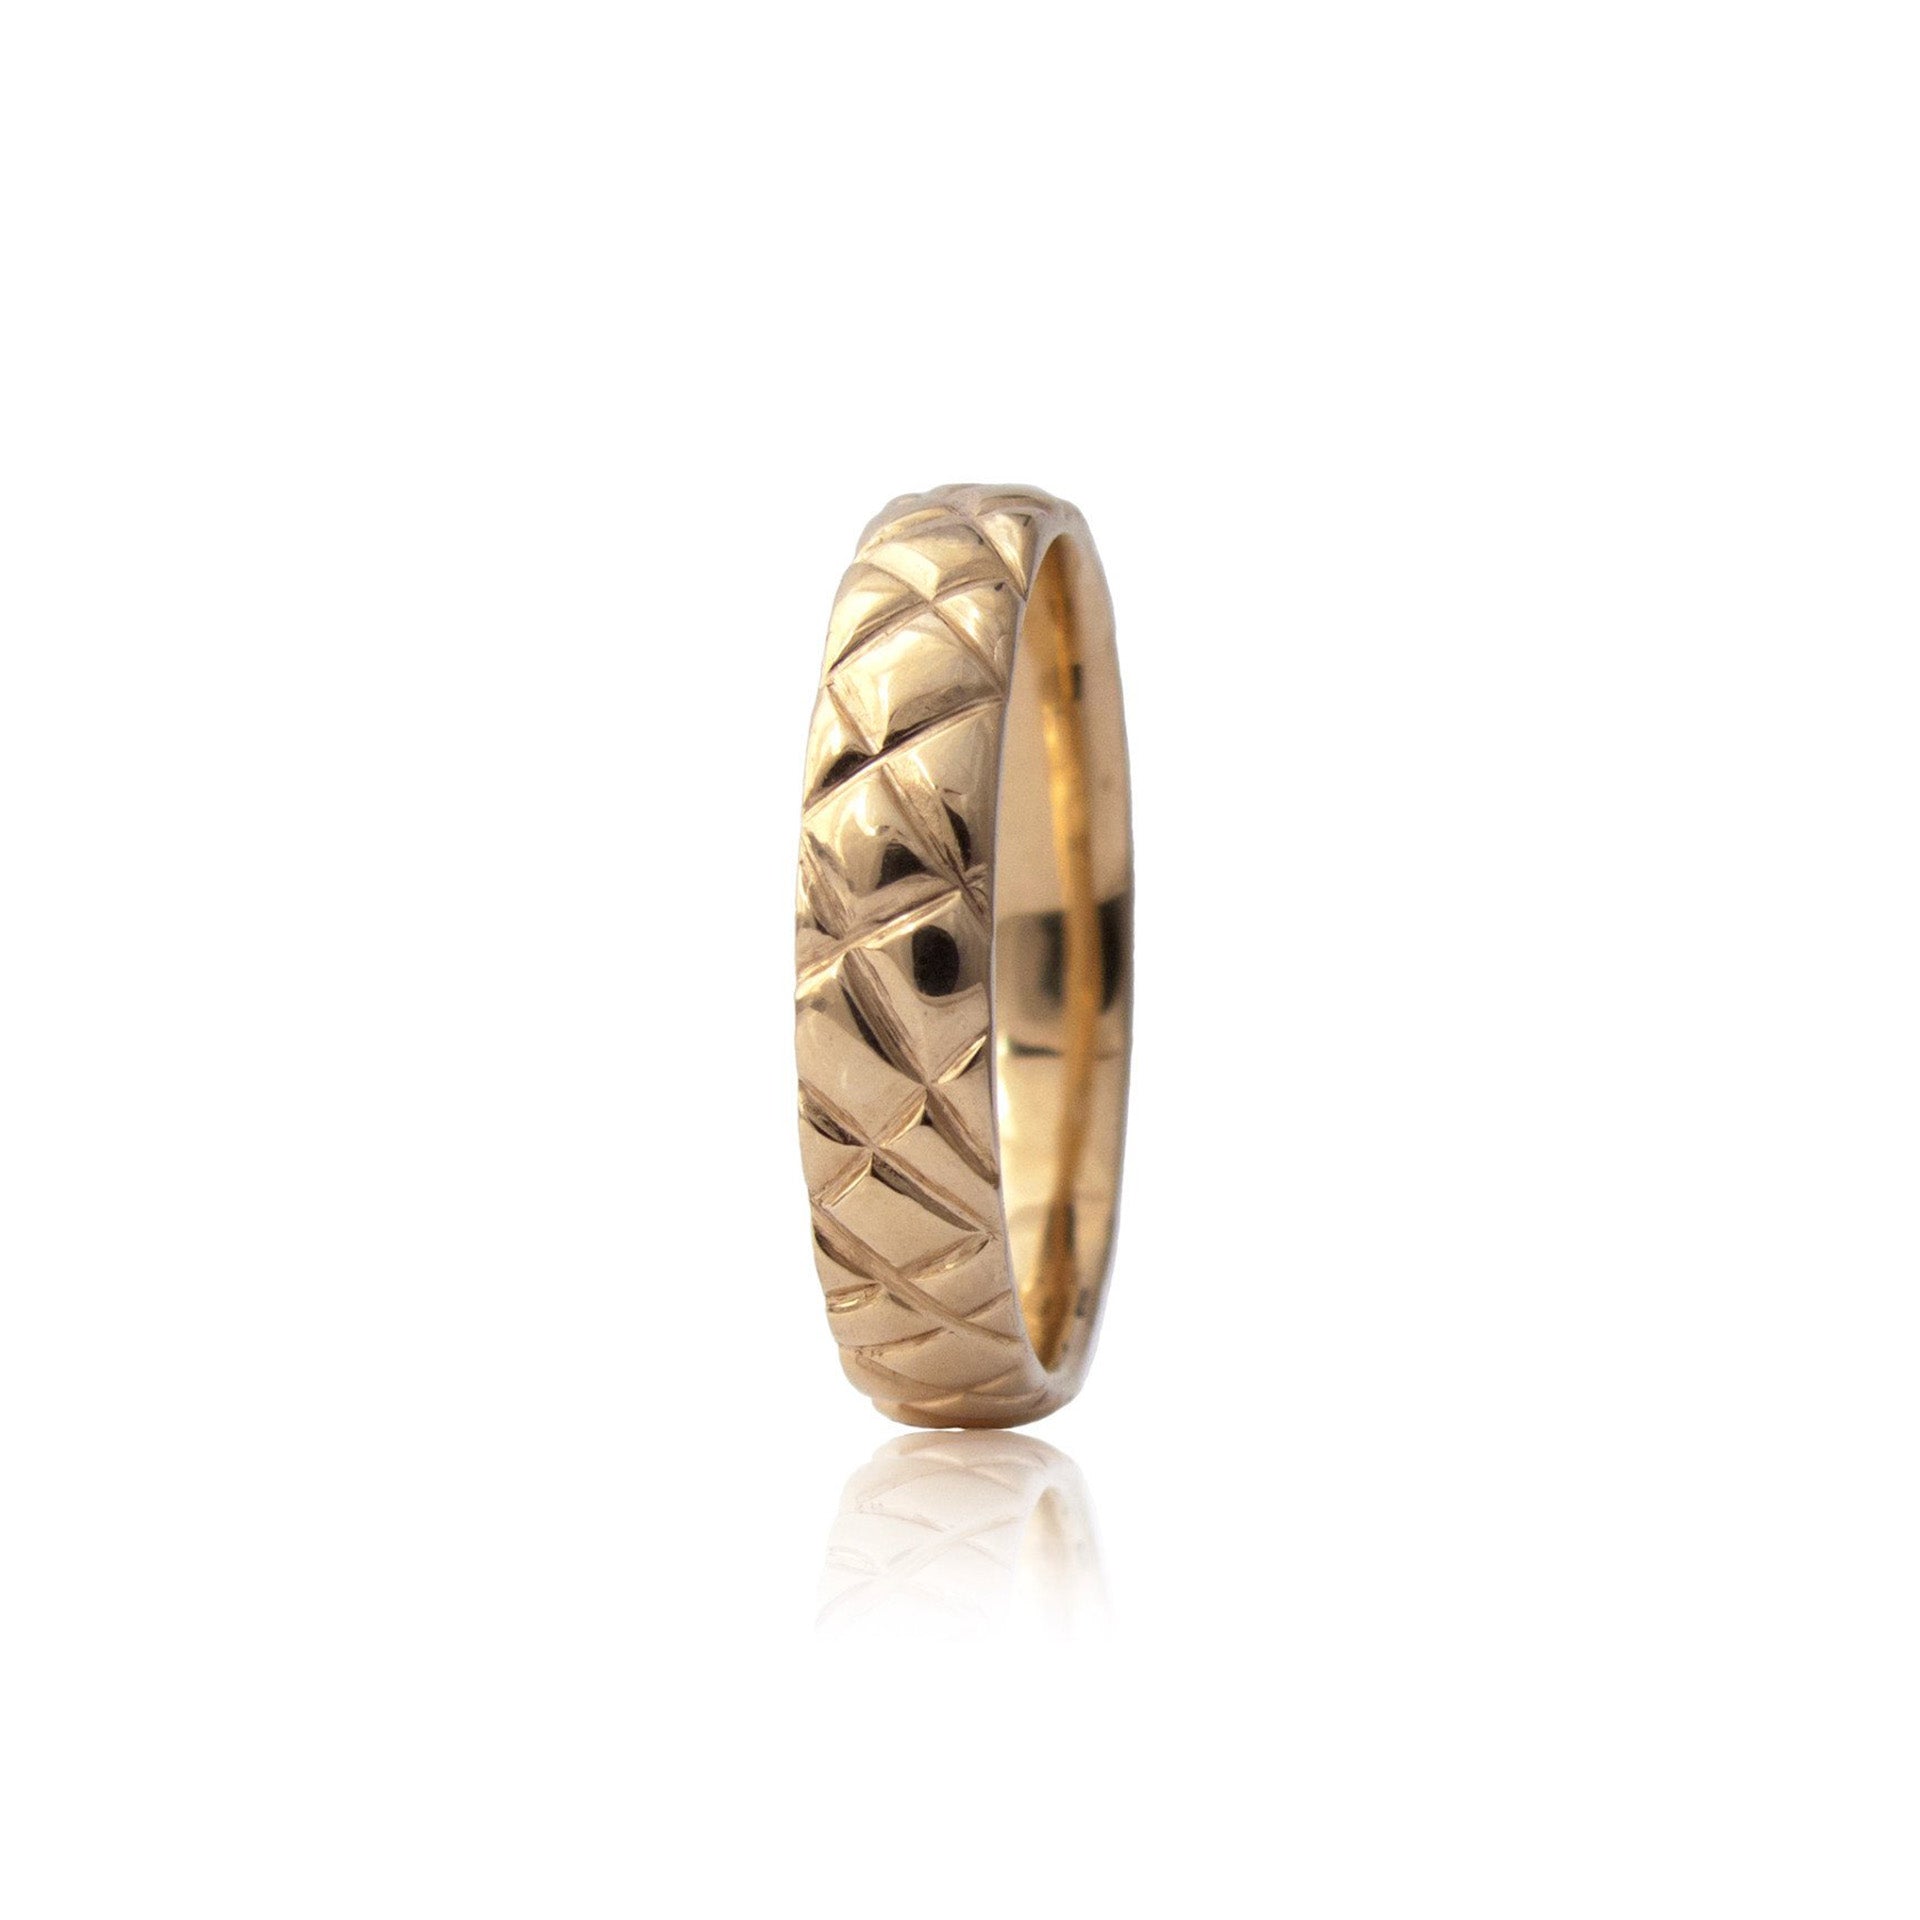 4.5mm quilted band crafted in 14KT rose gold. 